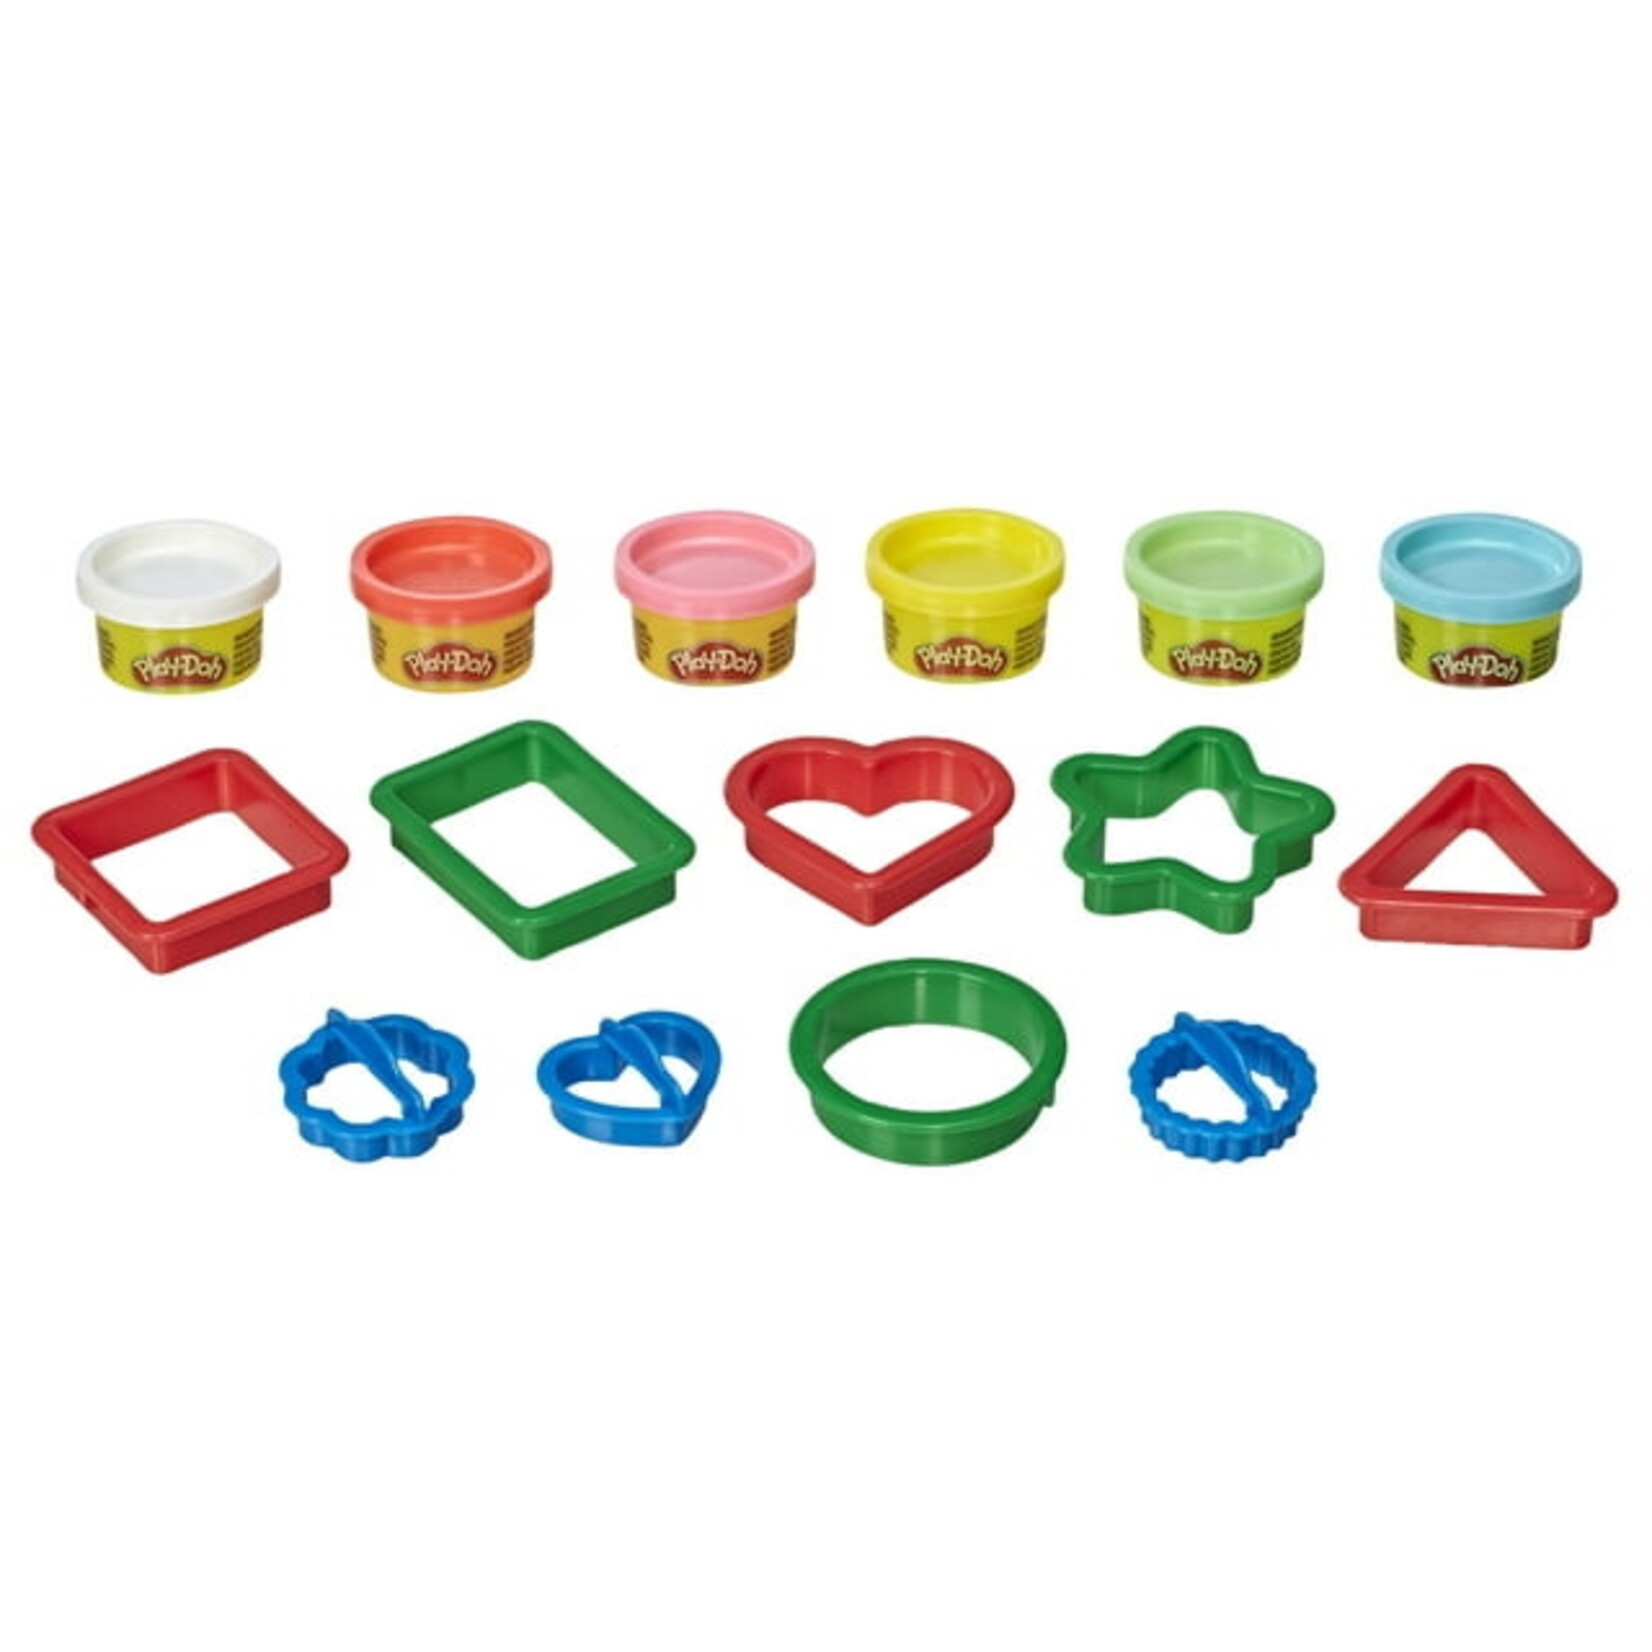 Hasbro Fundamentals Shapes Tool Set with 6, 1-Ounce Cans